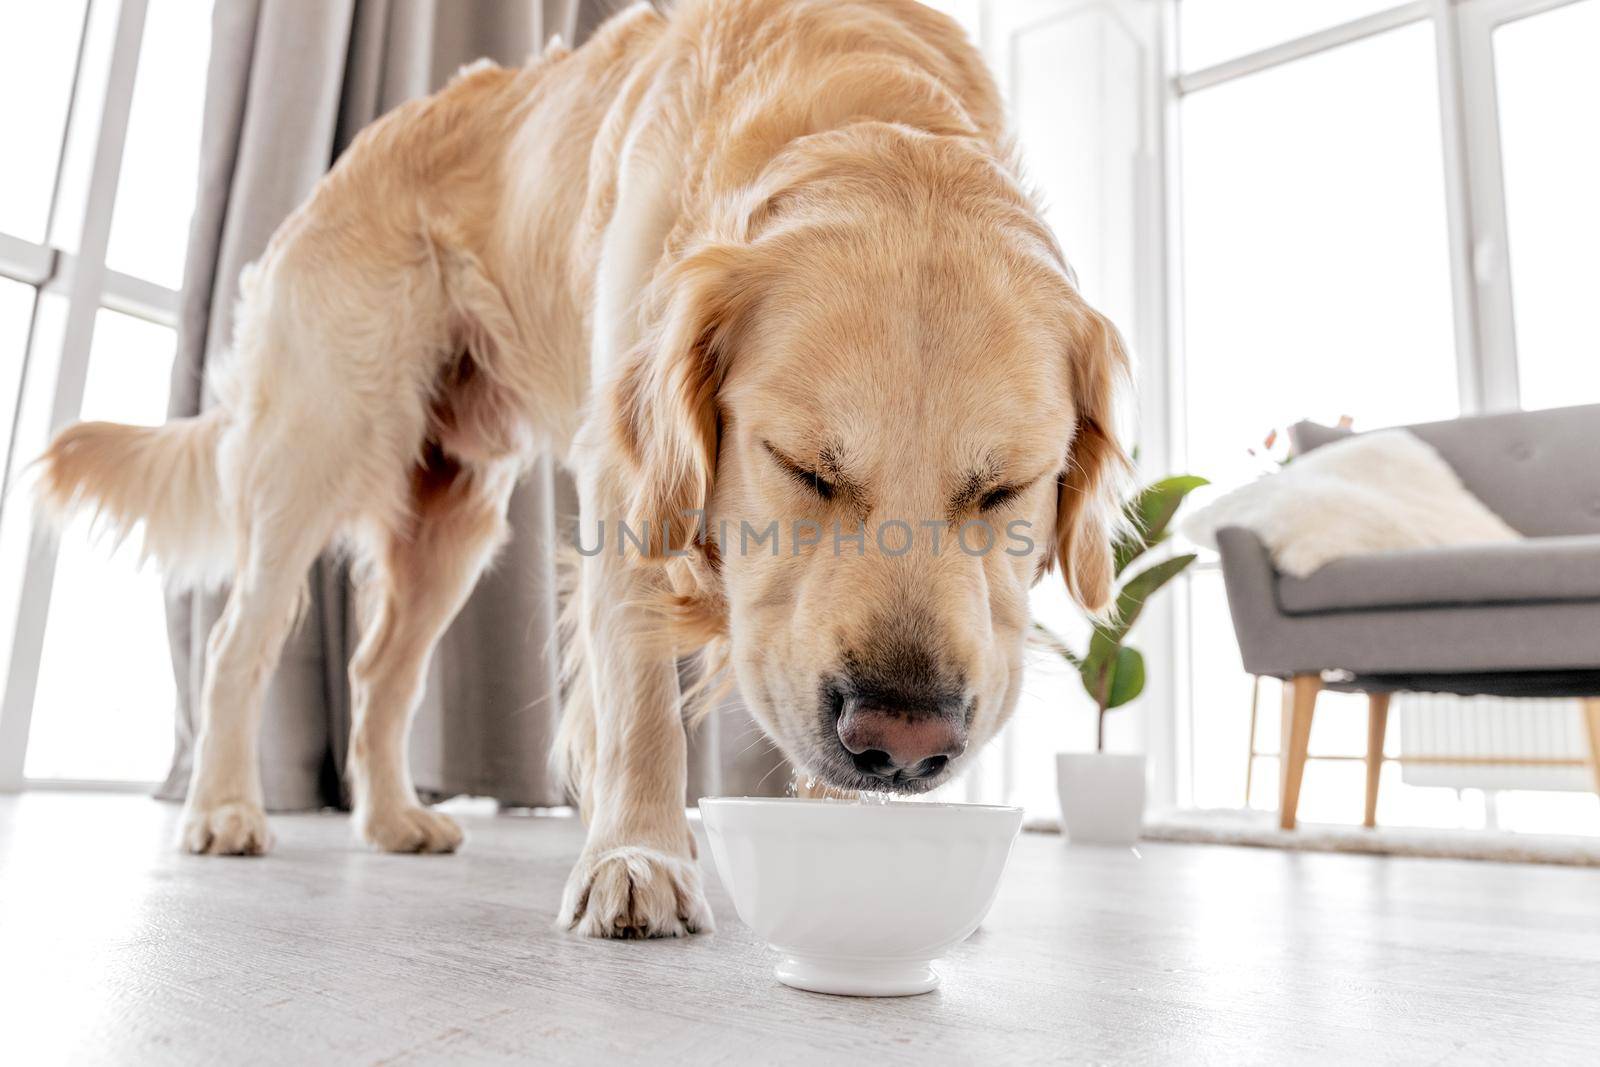 Cute golden retriever dog drinking water from bowl standing on the floor at home